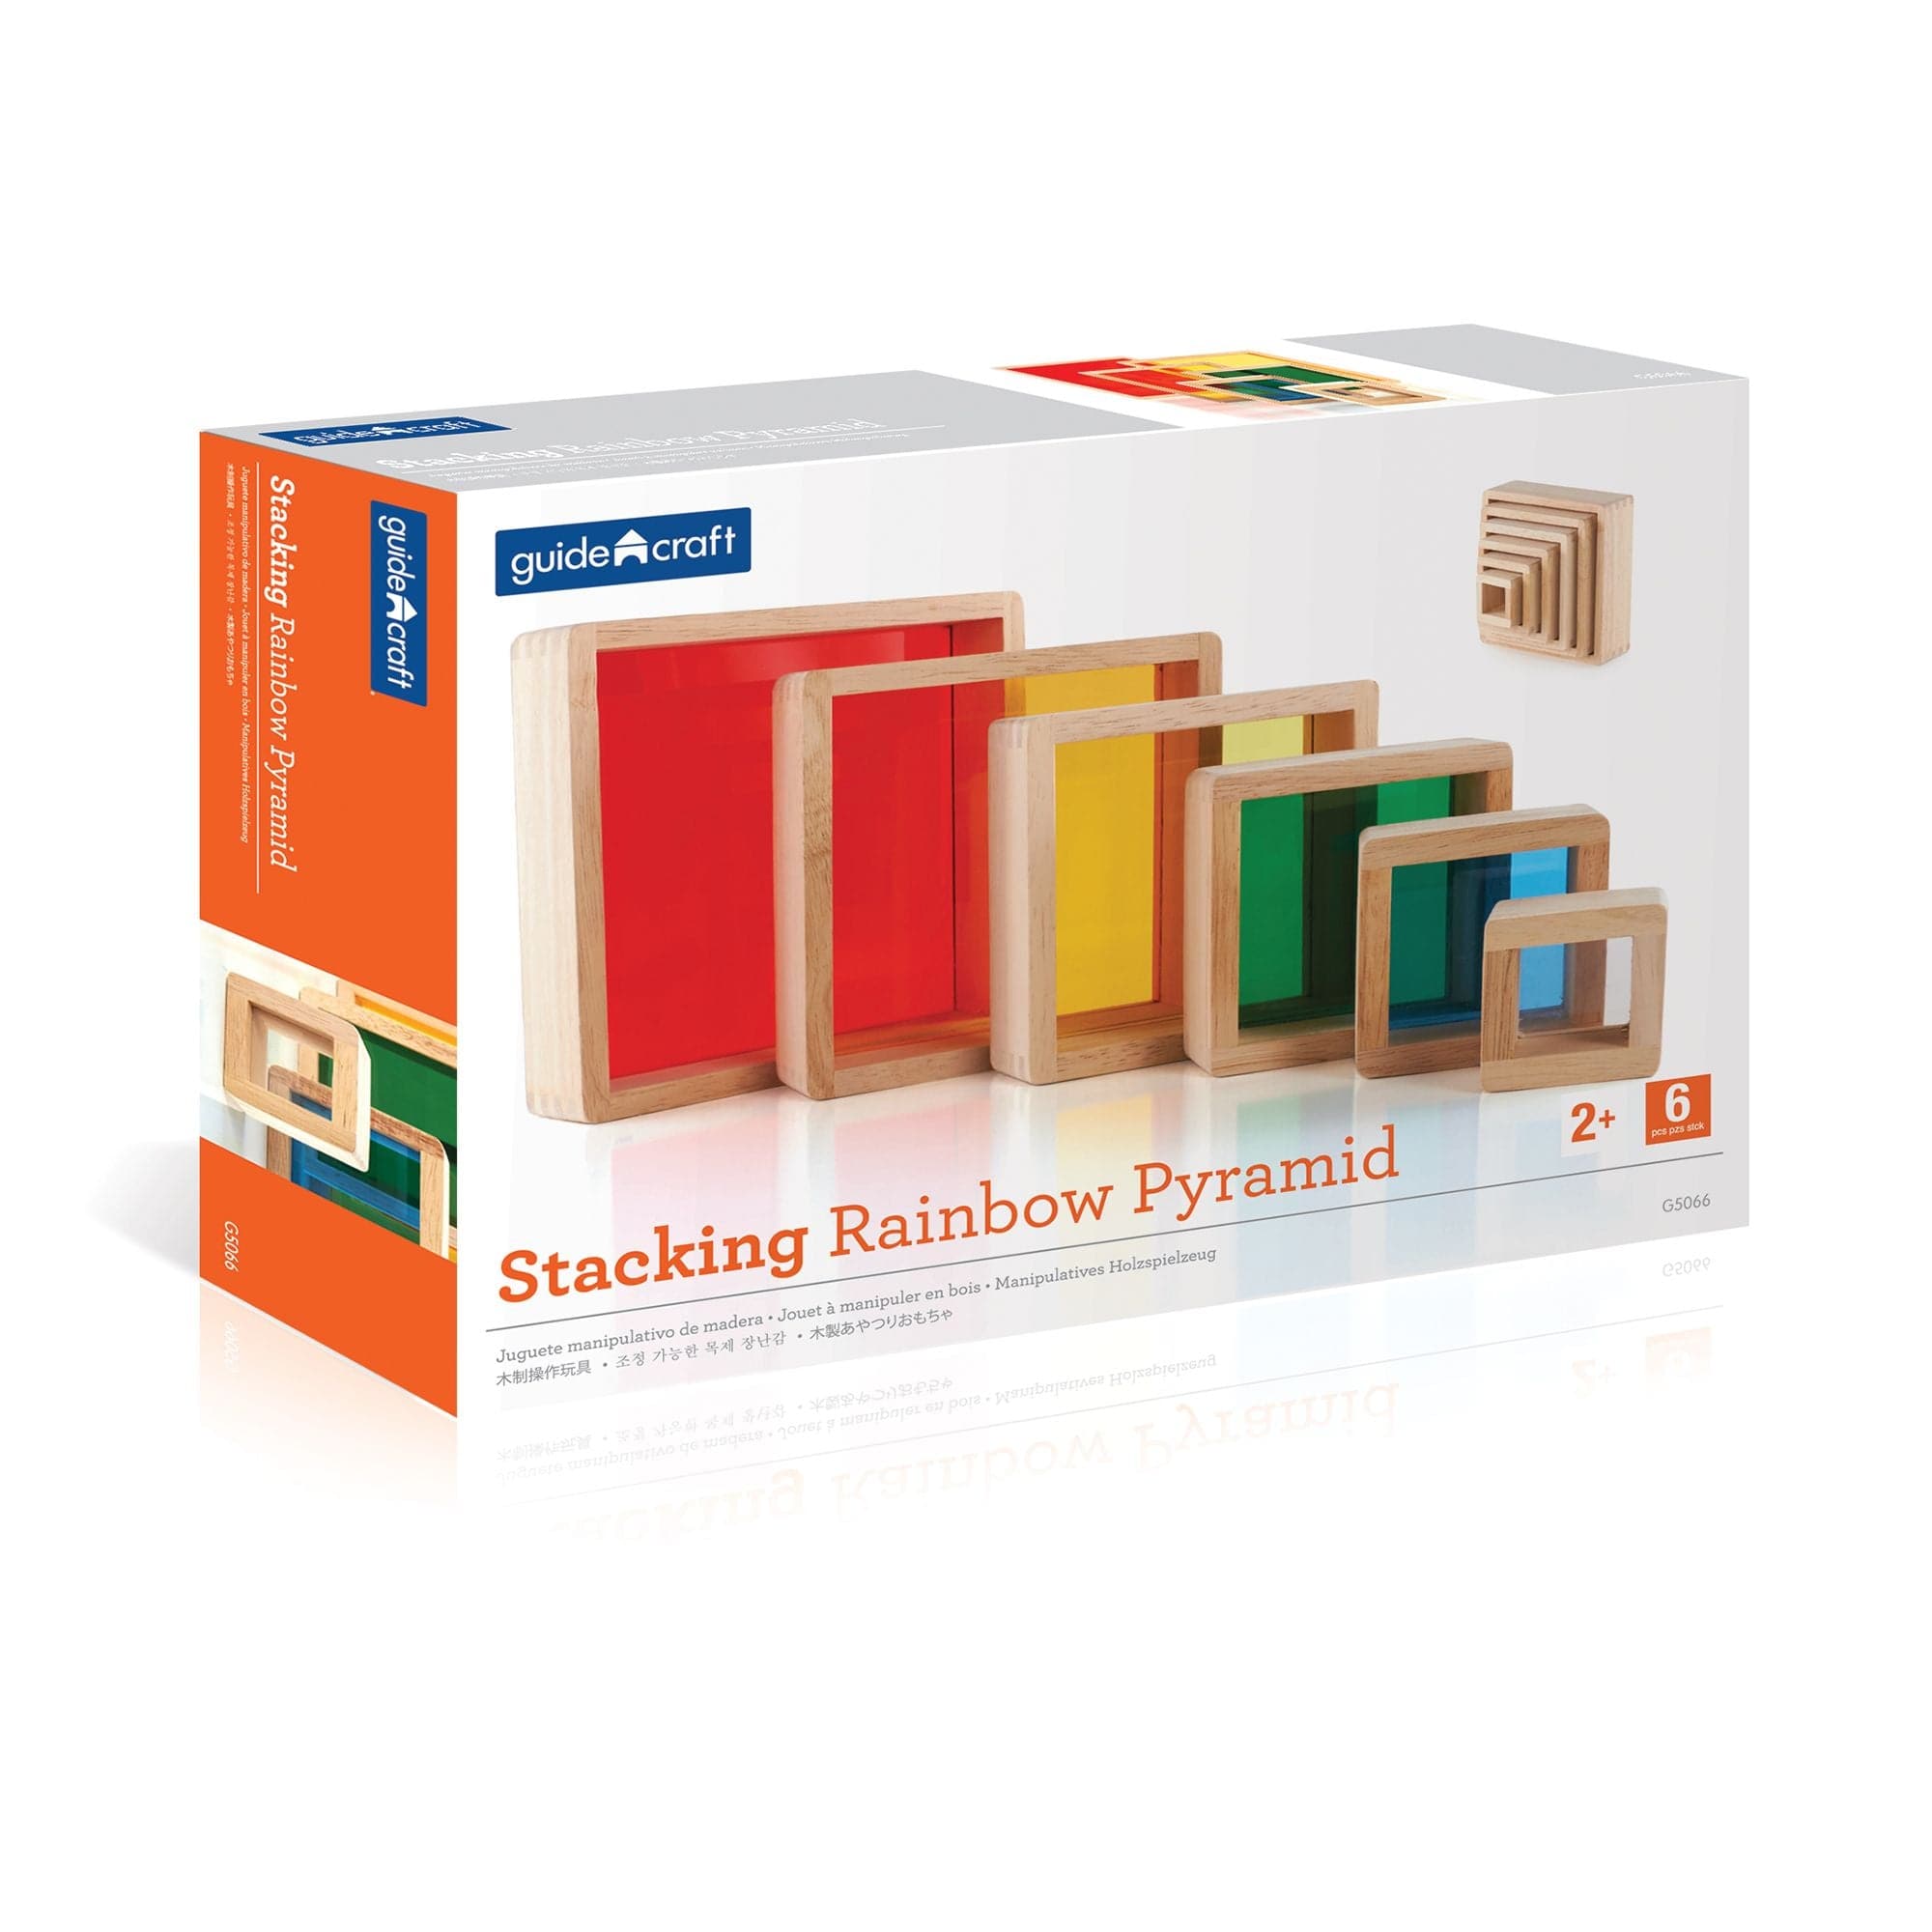 Guidecraft Stacking Rainbow Pyramid, Six hardwood Guidecraft Stacking Rainbow Pyramid squares featuring inset coloured plexi for stacking, sorting, building, sequencing and creating imaginative, colourful constructions! The Guidecraft Stacking Rainbow Pyramid doubles as a stand-alone manipulative or an addition to hardwood block construction. The Guidecraft Stacking Rainbow Pyramid have hardwood frames, rounded corners and edges, and inset acrylic windows. Solid wood frames with inset coloured acrylic windo